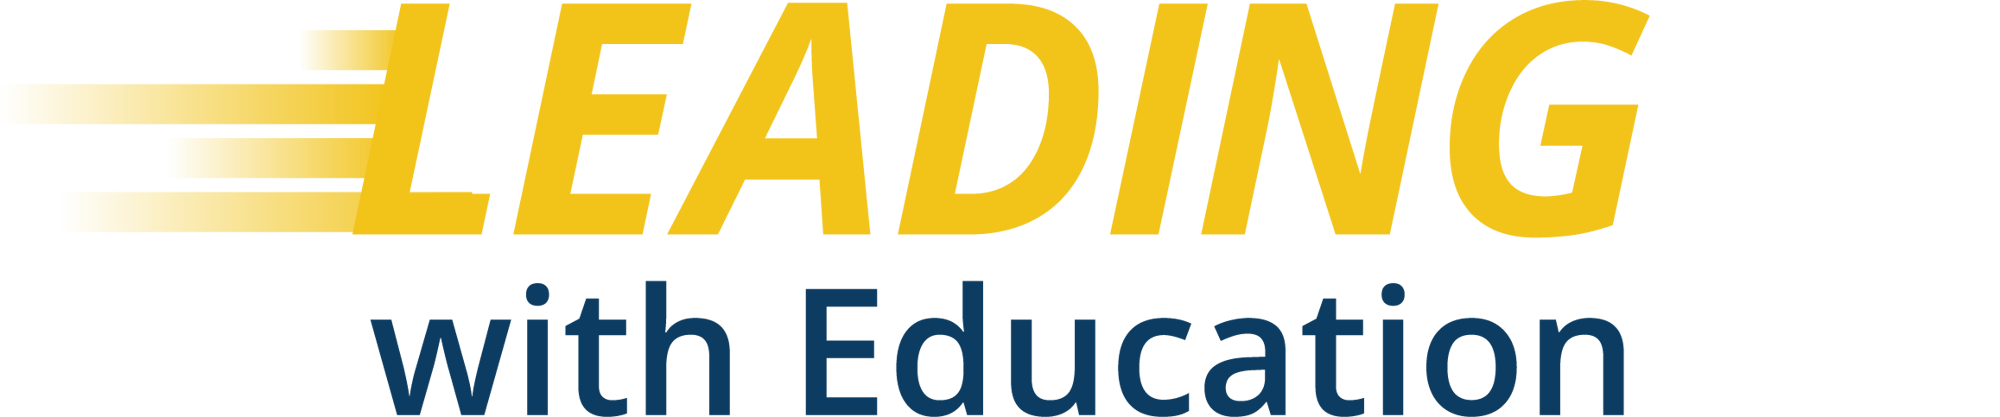 Leading with Education